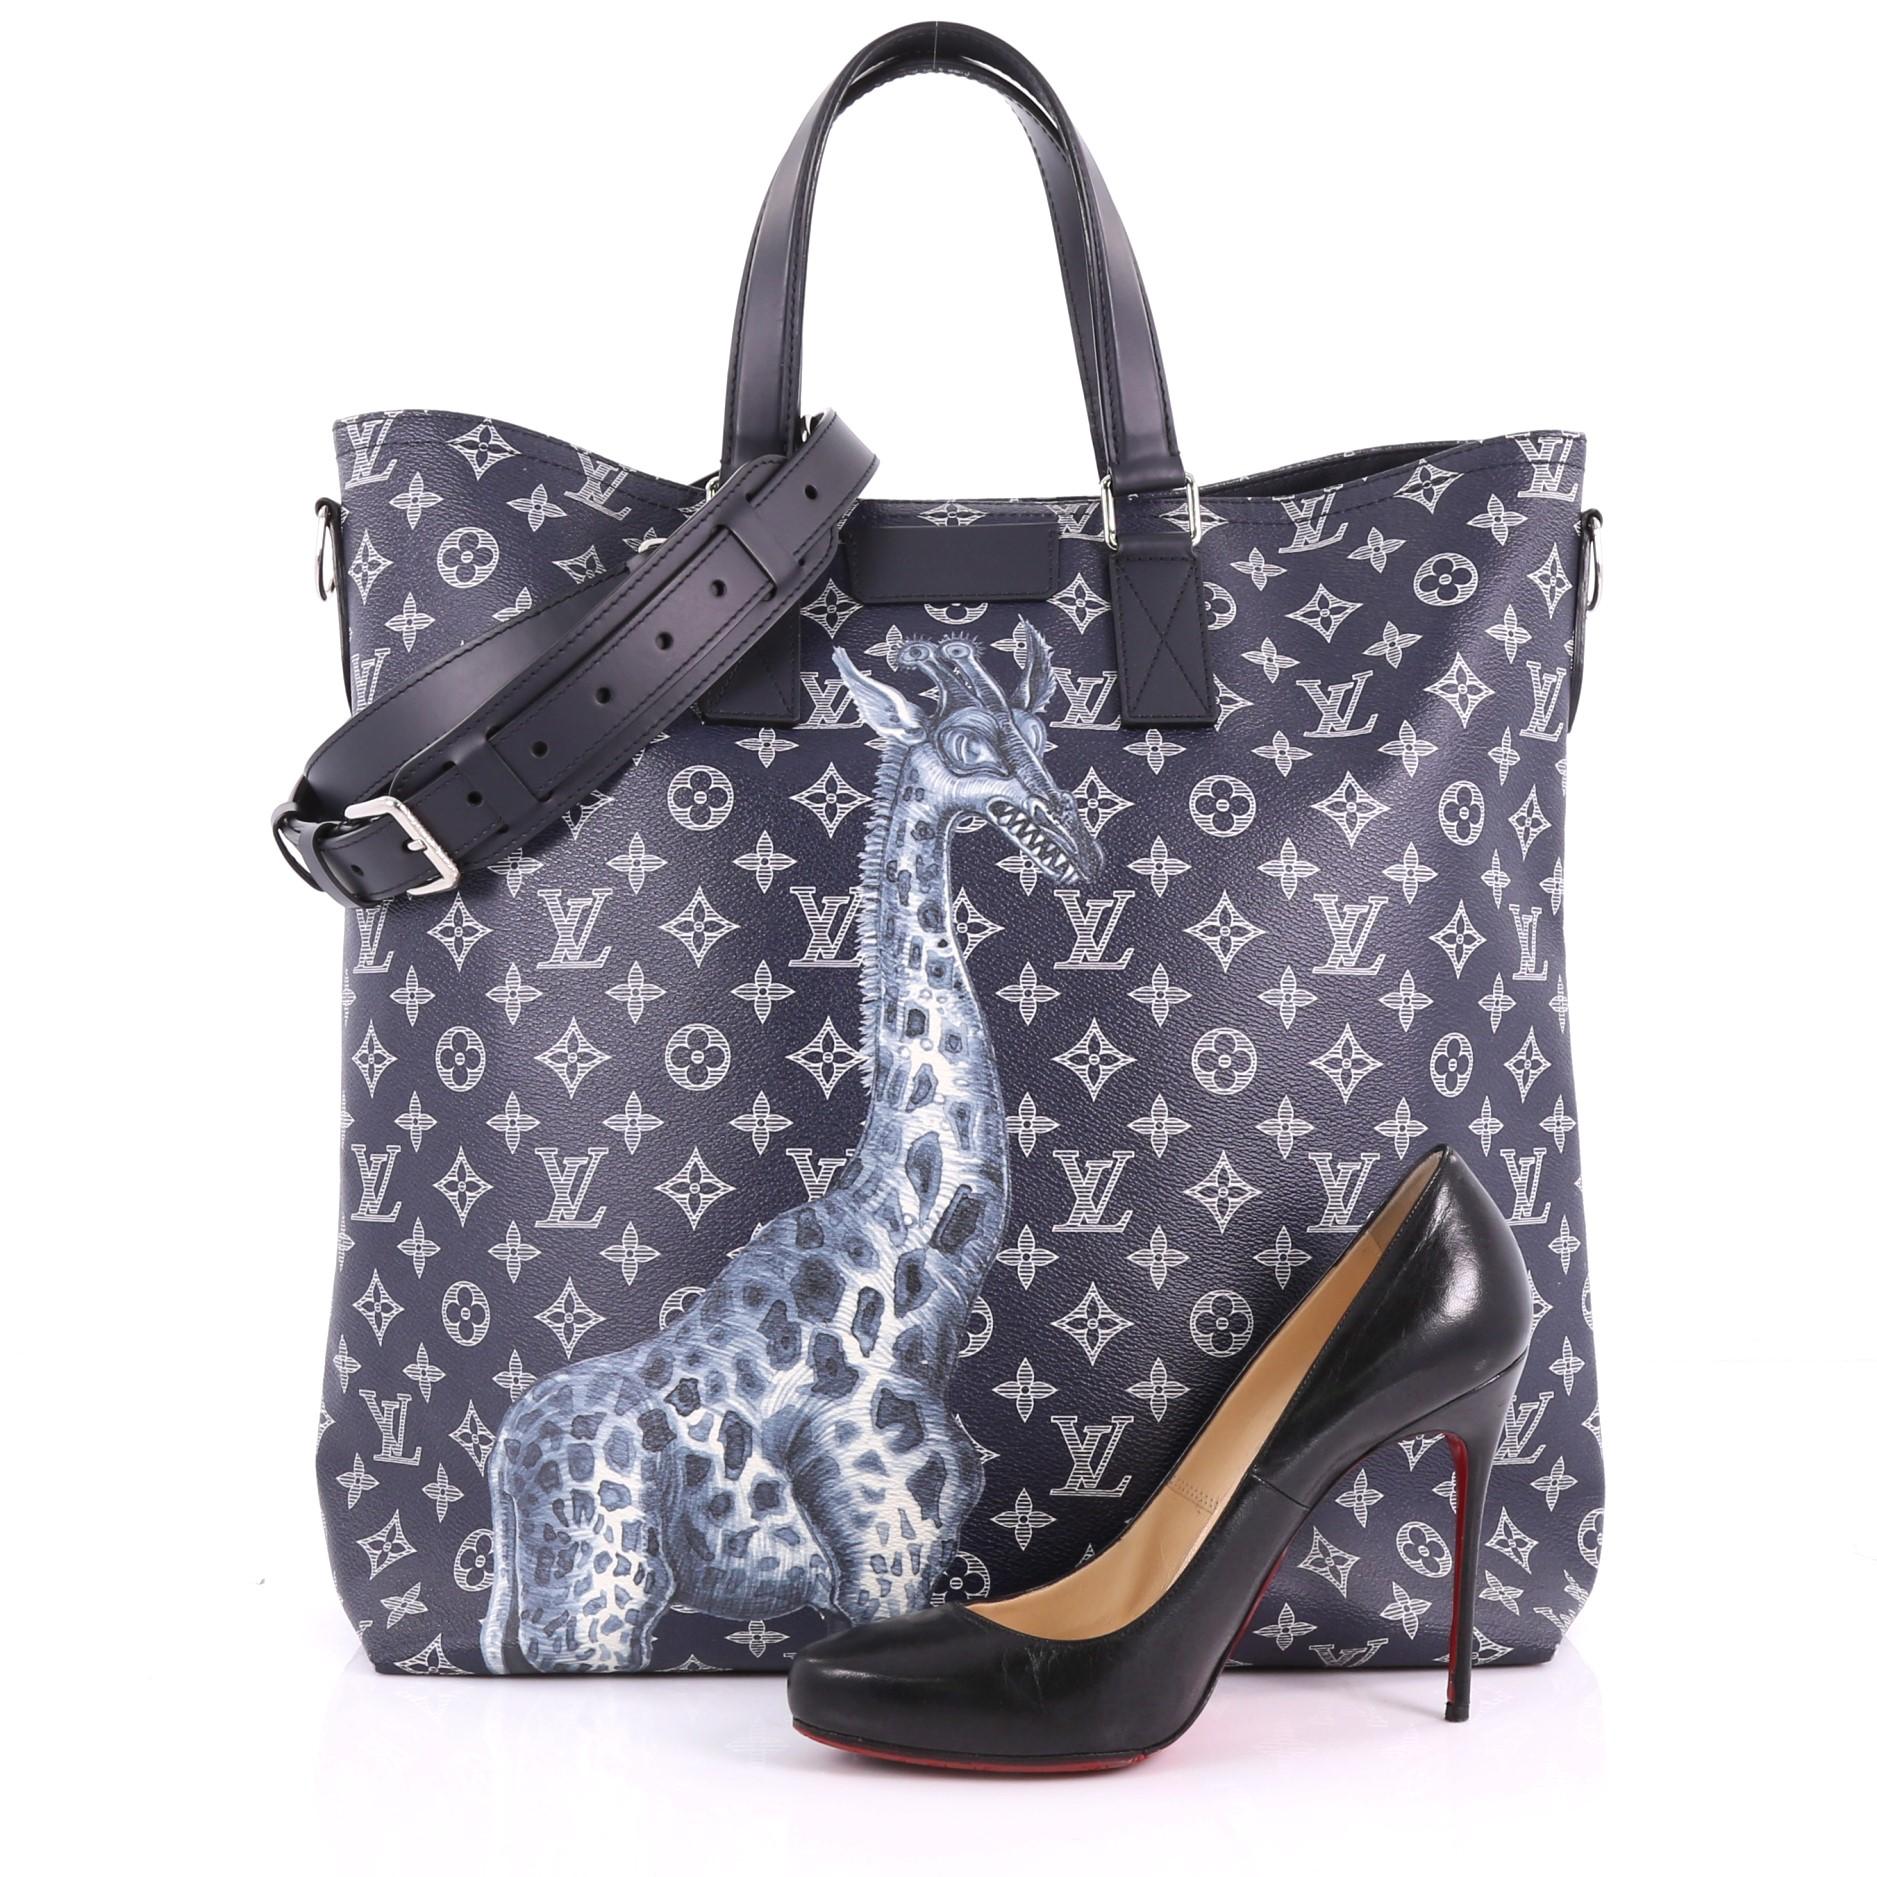 This Louis Vuitton Tote Limited Edition Monogram Savane Canvas, crafted in blue monogram coated canvas with signature giraffe print at front, features dual-flat leather handles, and silver-tone hardware. Its magnetic snap button closure opens to a